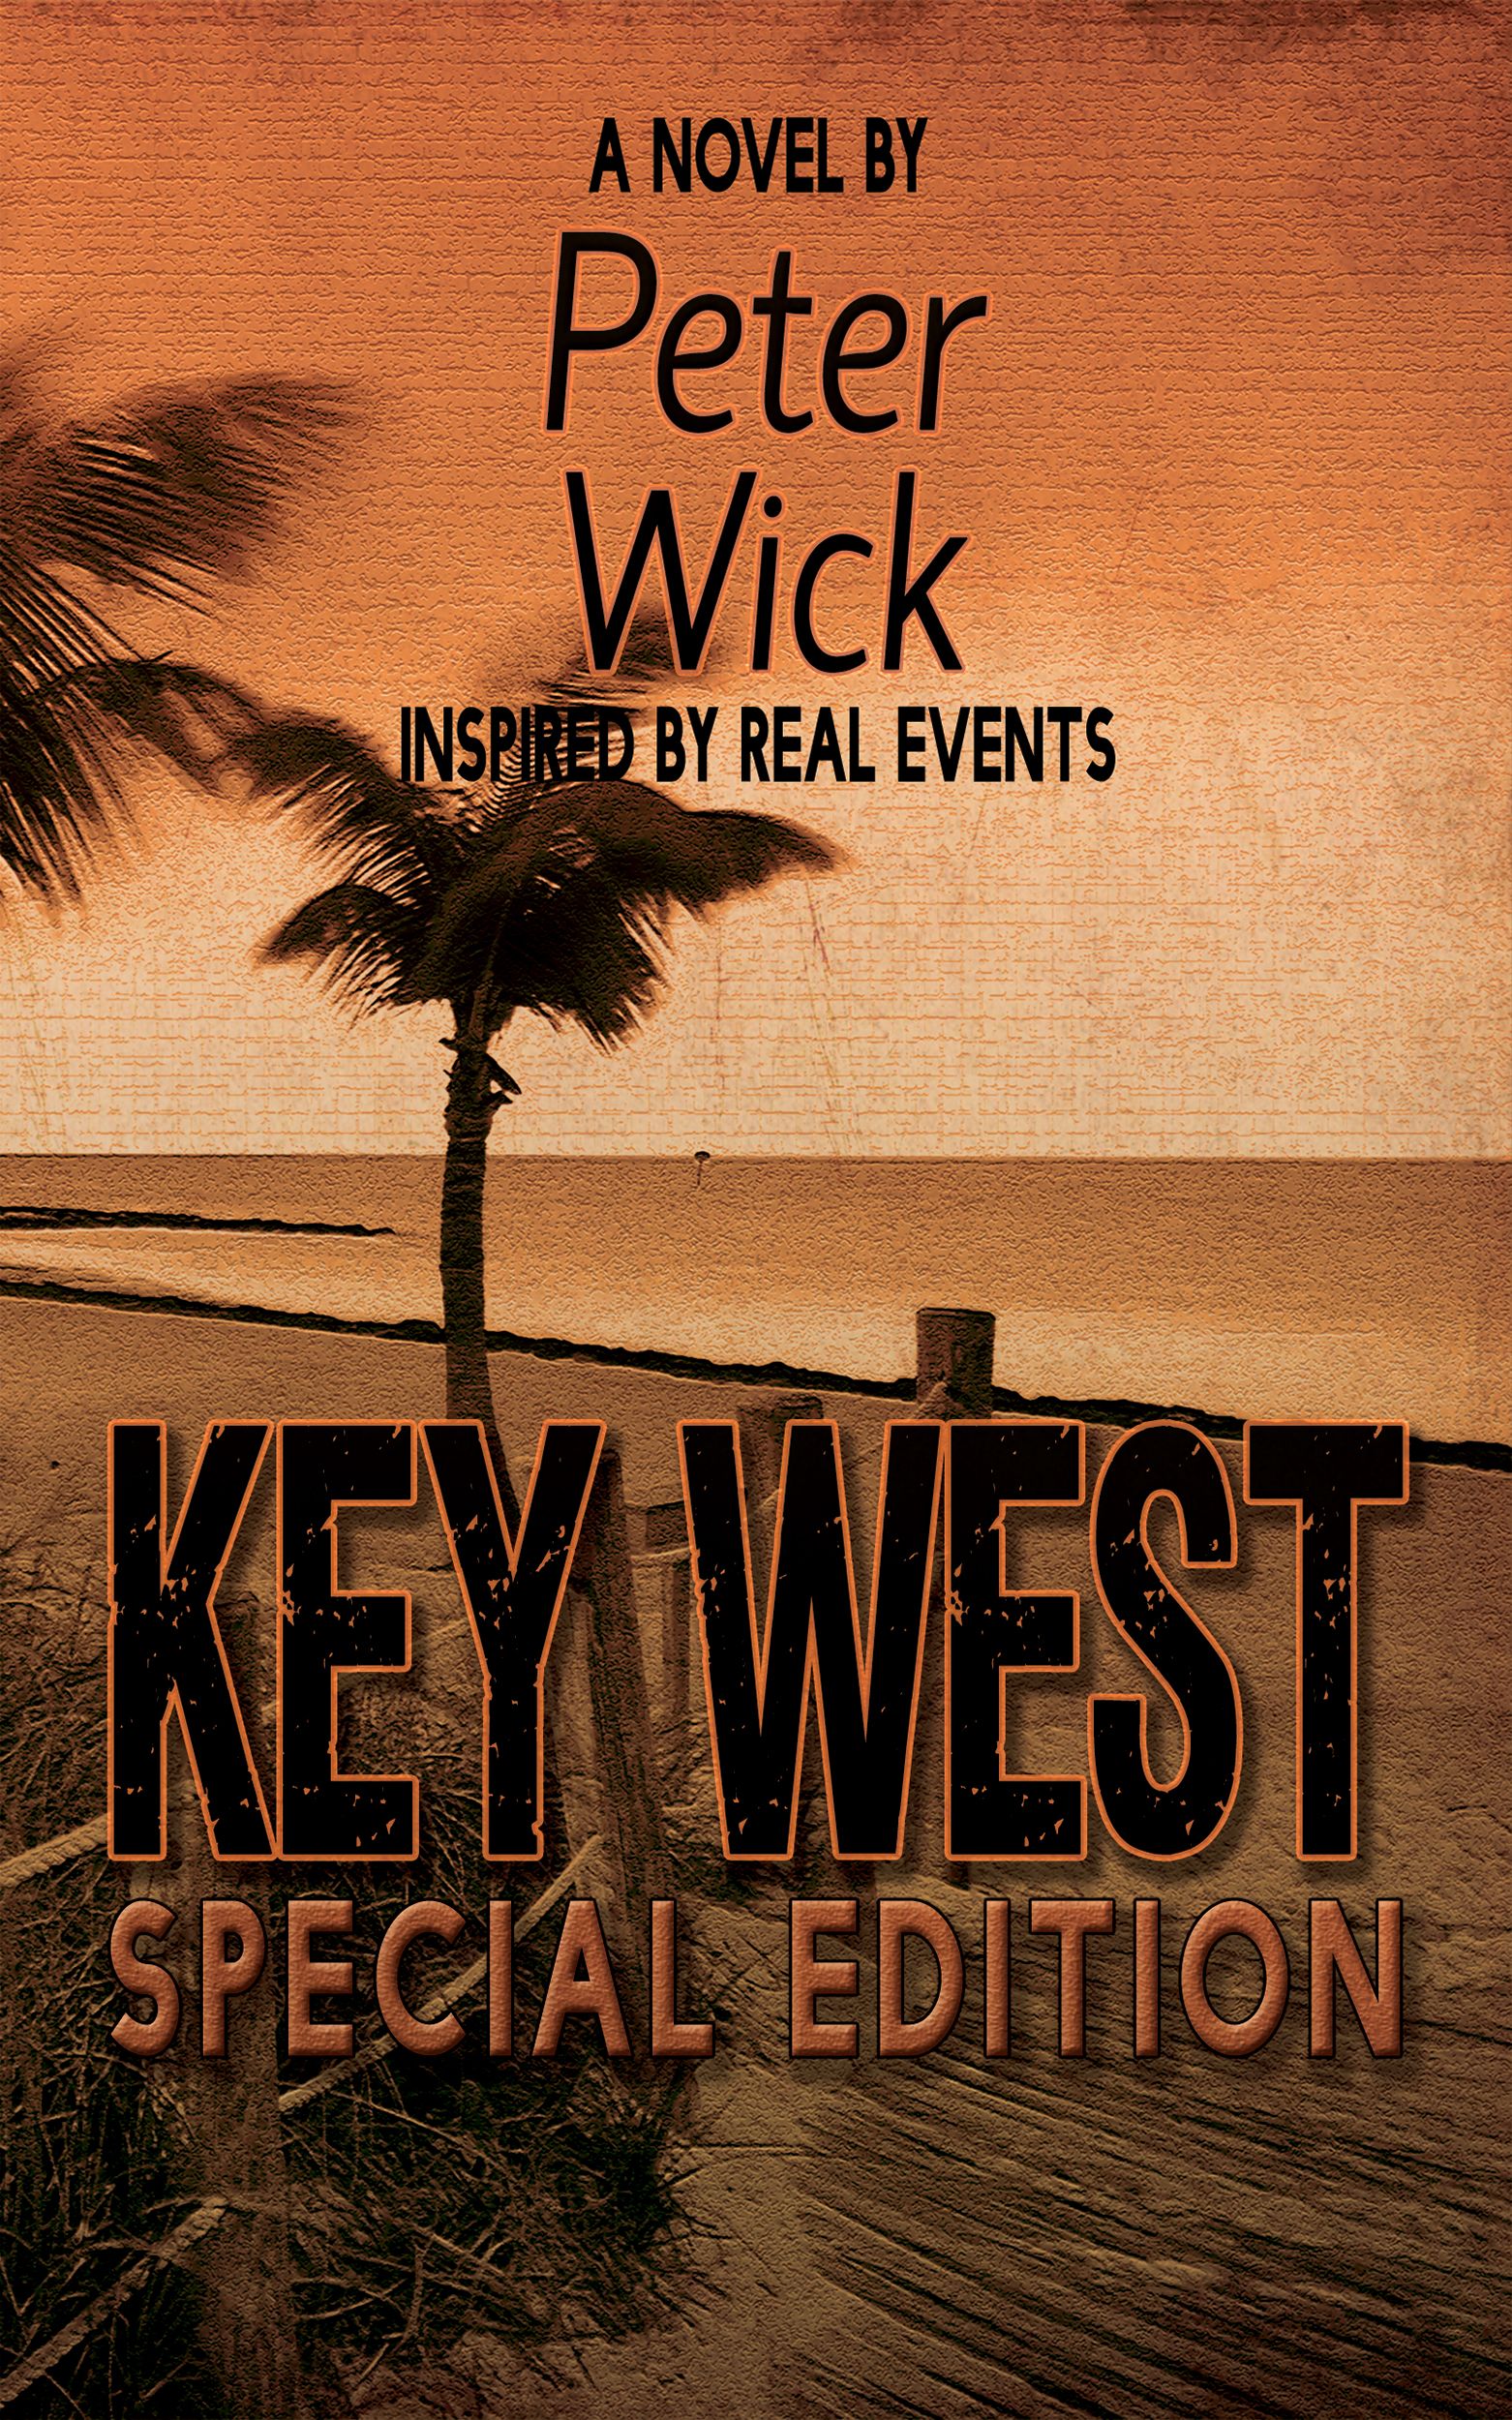 REVISED-KeyWest-SpecialEdition-AmazonKindleCover-FRONT